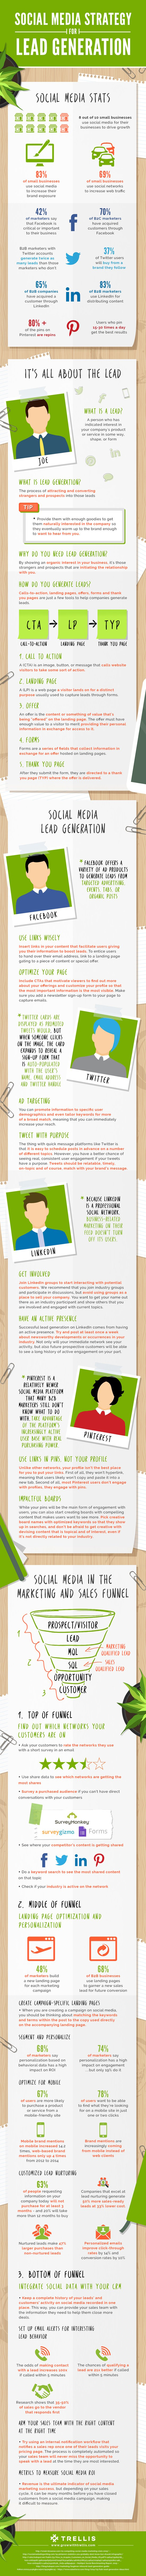 How Social Media Can Drive Lead Generation 